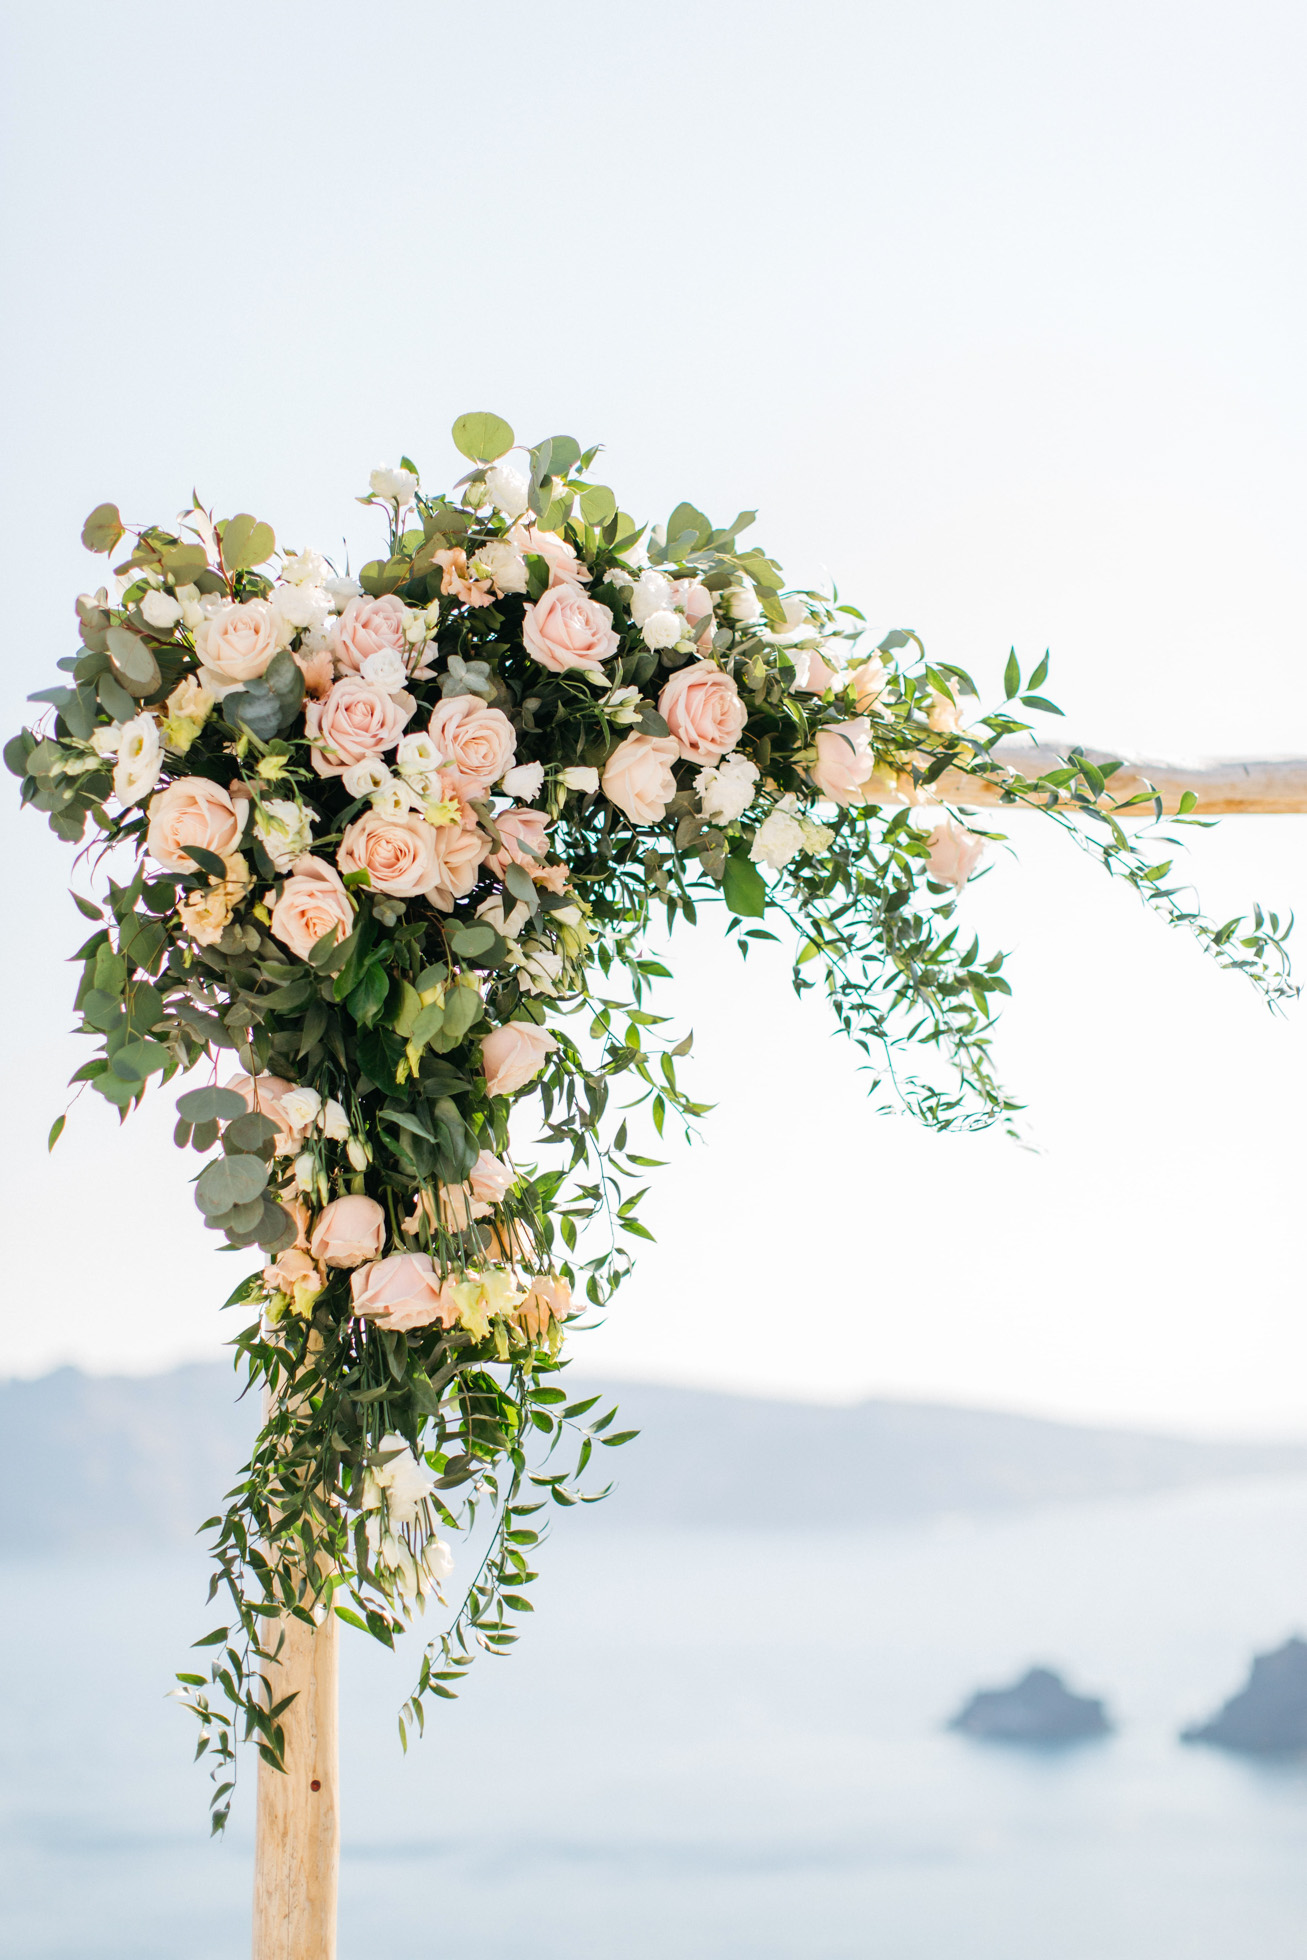 Flowery wedding arch and ceremony setup in Canaves Suites Oia Santorini.